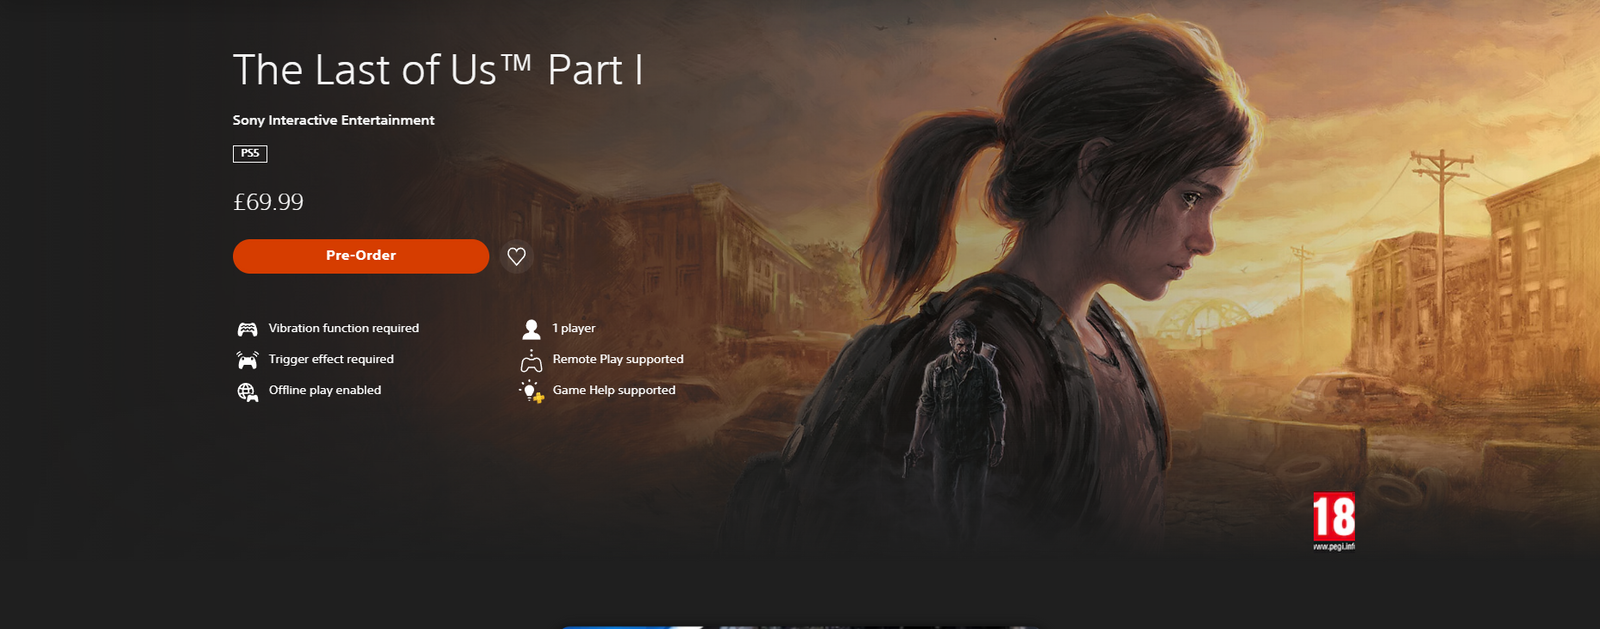 A screenshot of The Last of Us Remake's store page on the PlayStation website.